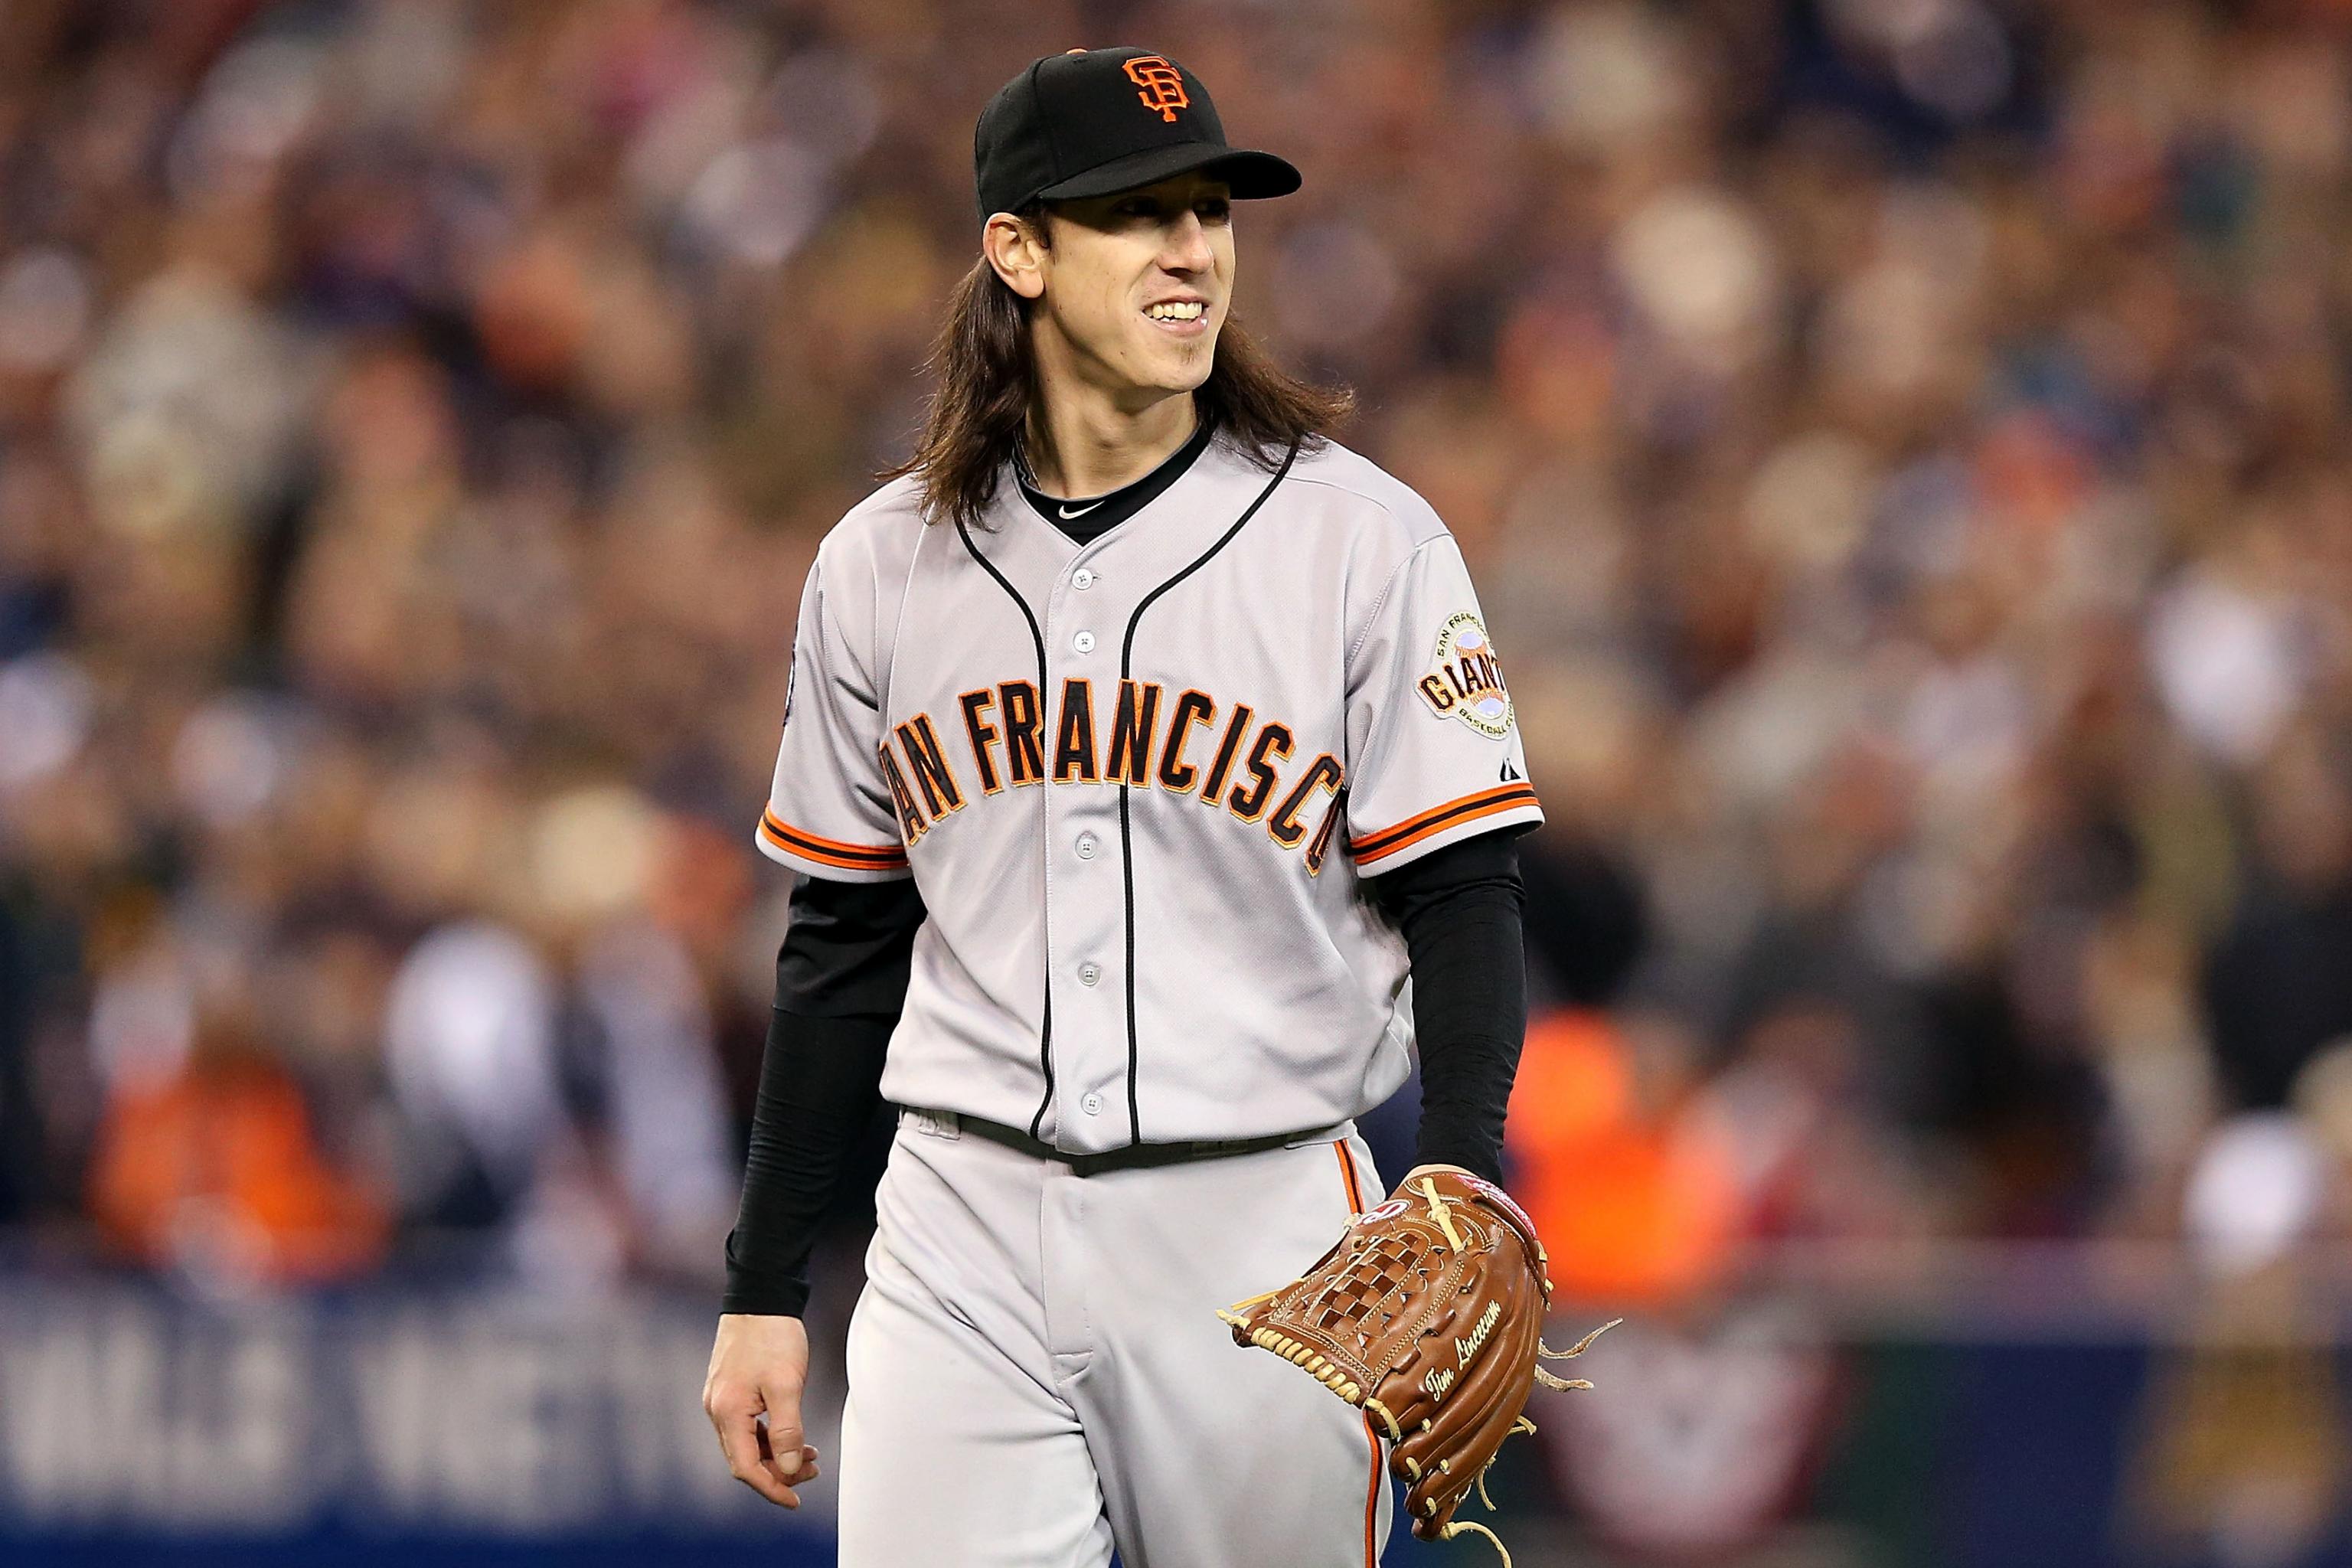 Former Grizzlies / SF Giants pitcher Tim Lincecum in Fresno